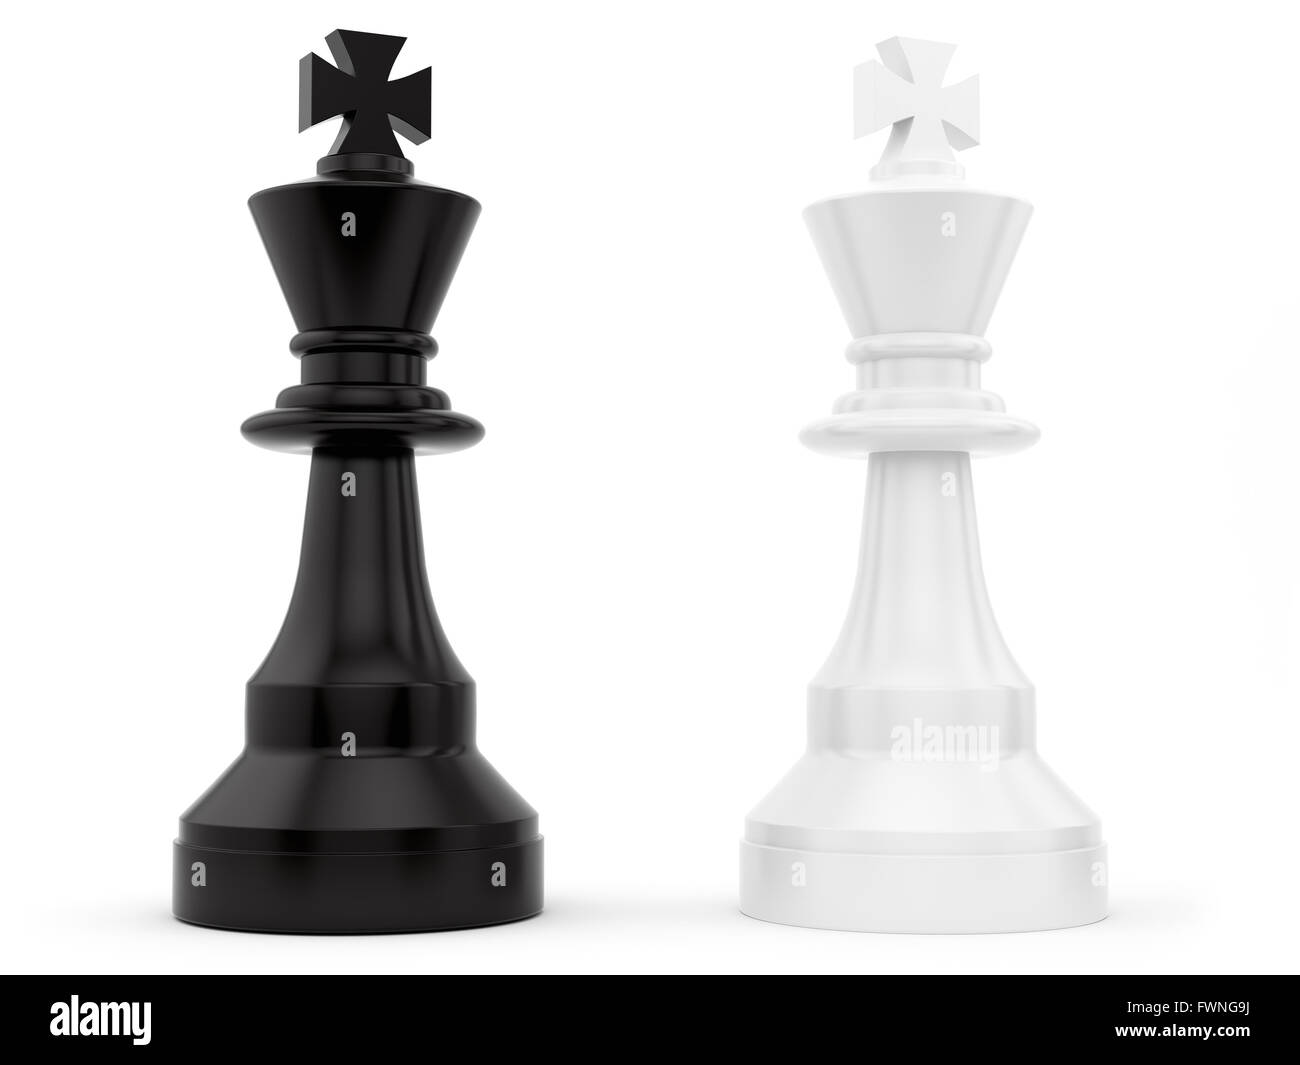 3d Rendering Golden Rook Chess Piece, 3d, Board Game, Business PNG  Transparent Image and Clipart for Free Download